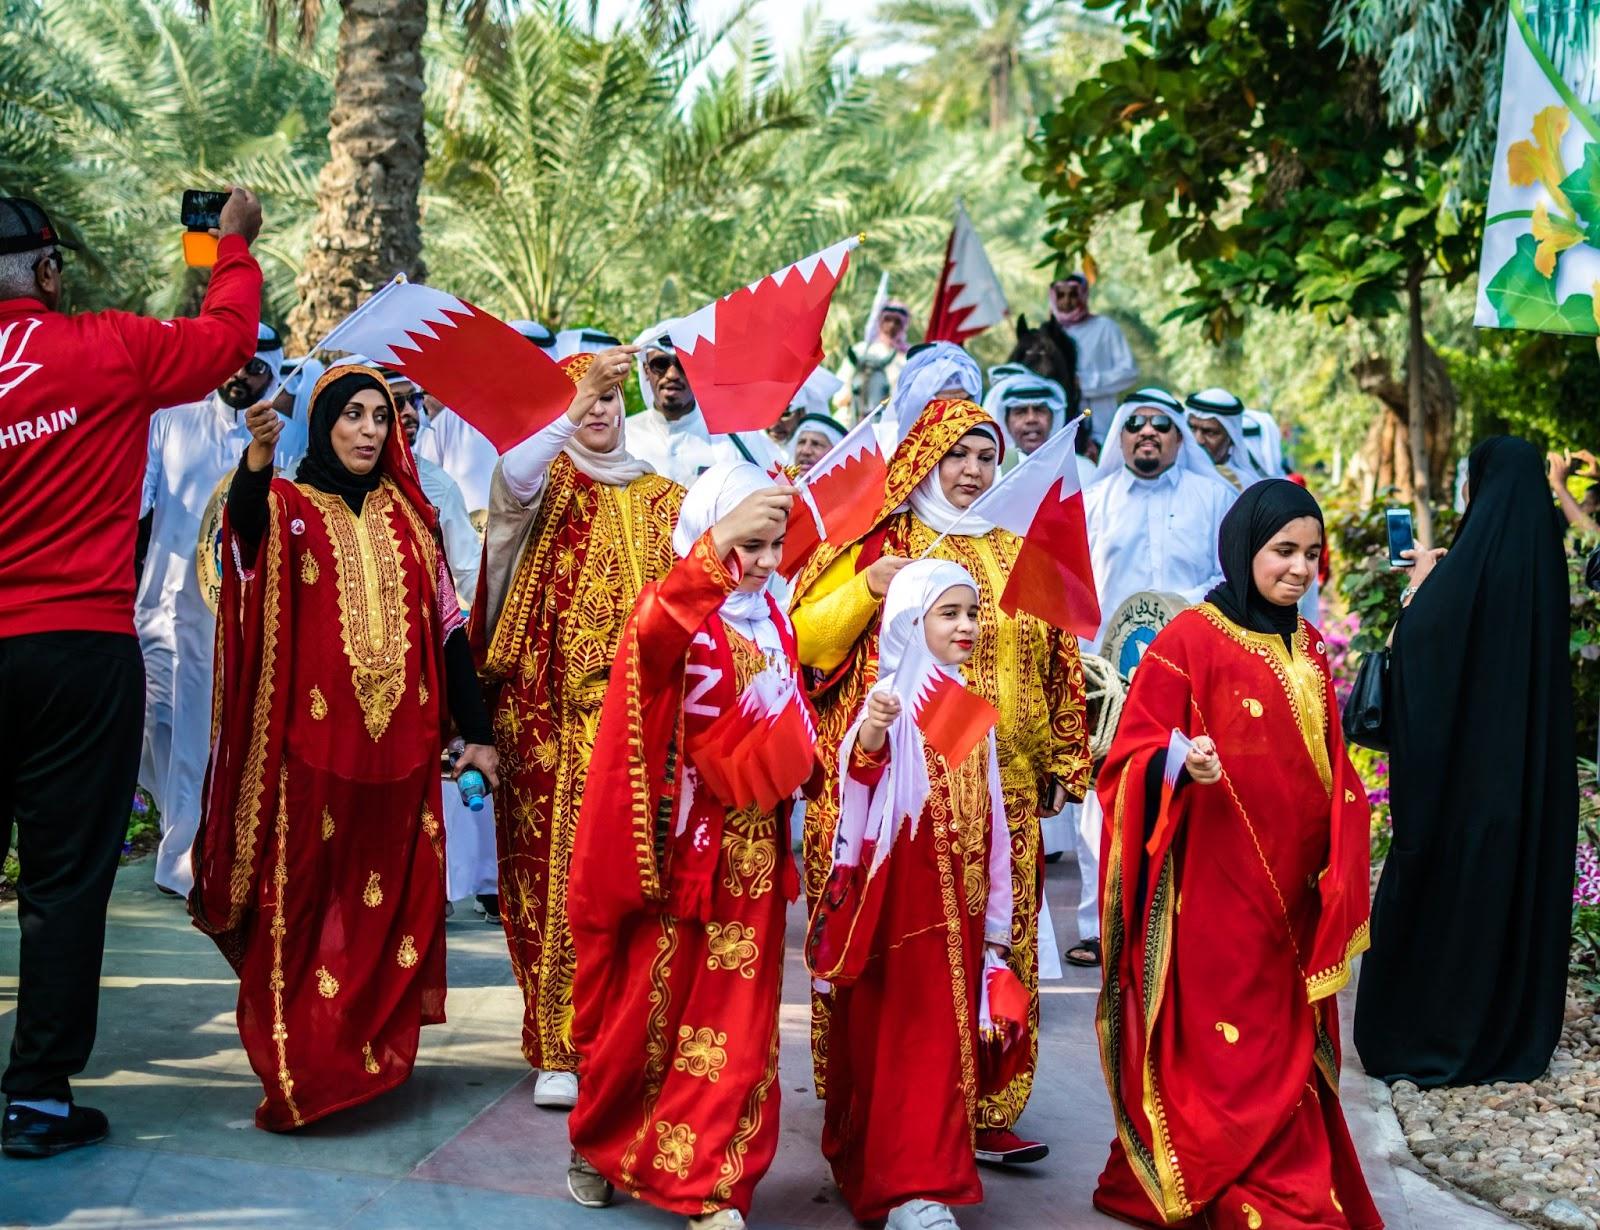 A group of people in their traditional coloured dresses walks on the street during national day parade celebration in Bahrain